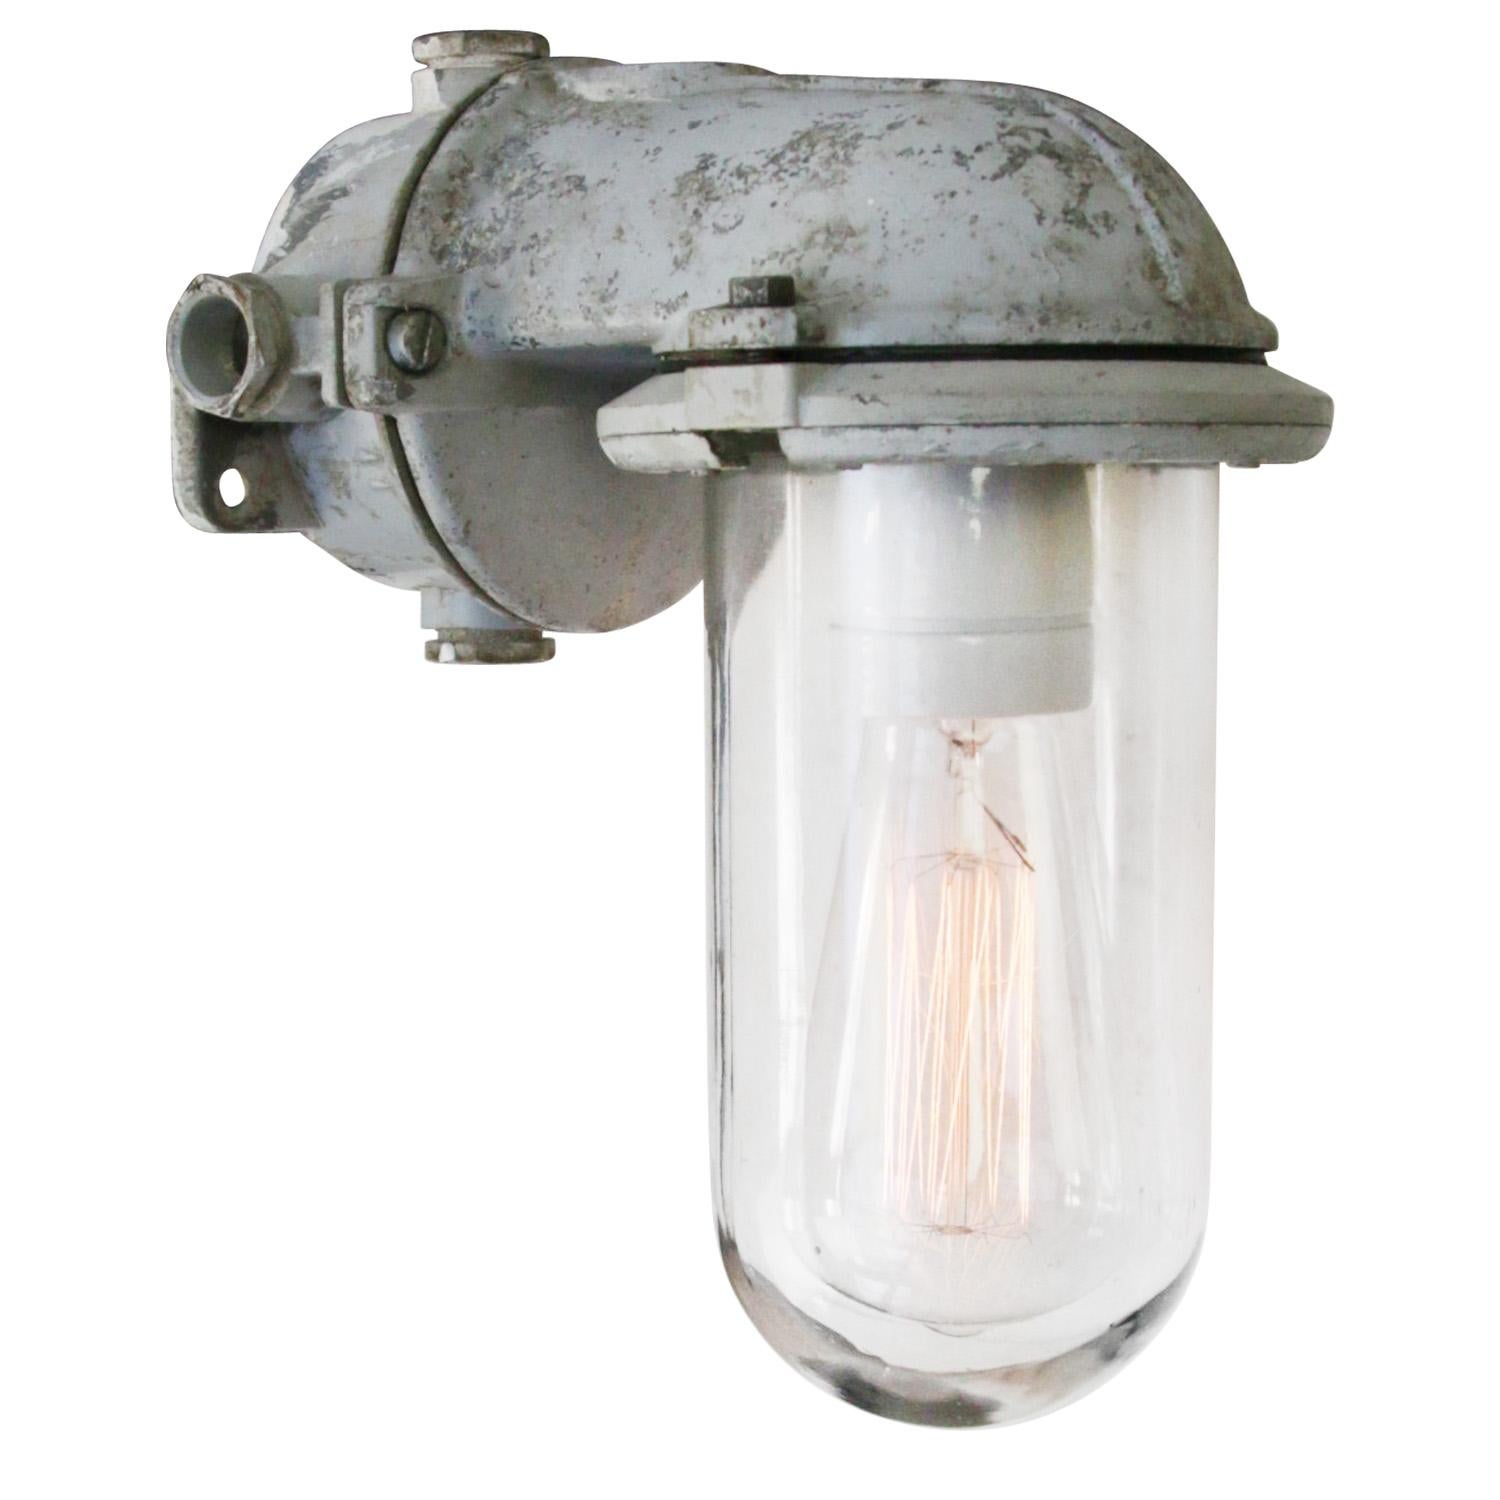 Industria Rotterdam industrial wall light
cast aluminium, clear glass

Weight: 1.70 kg / 3.7 lb

Priced per individual item. All lamps have been made suitable by international standards for incandescent light bulbs, energy-efficient and LED